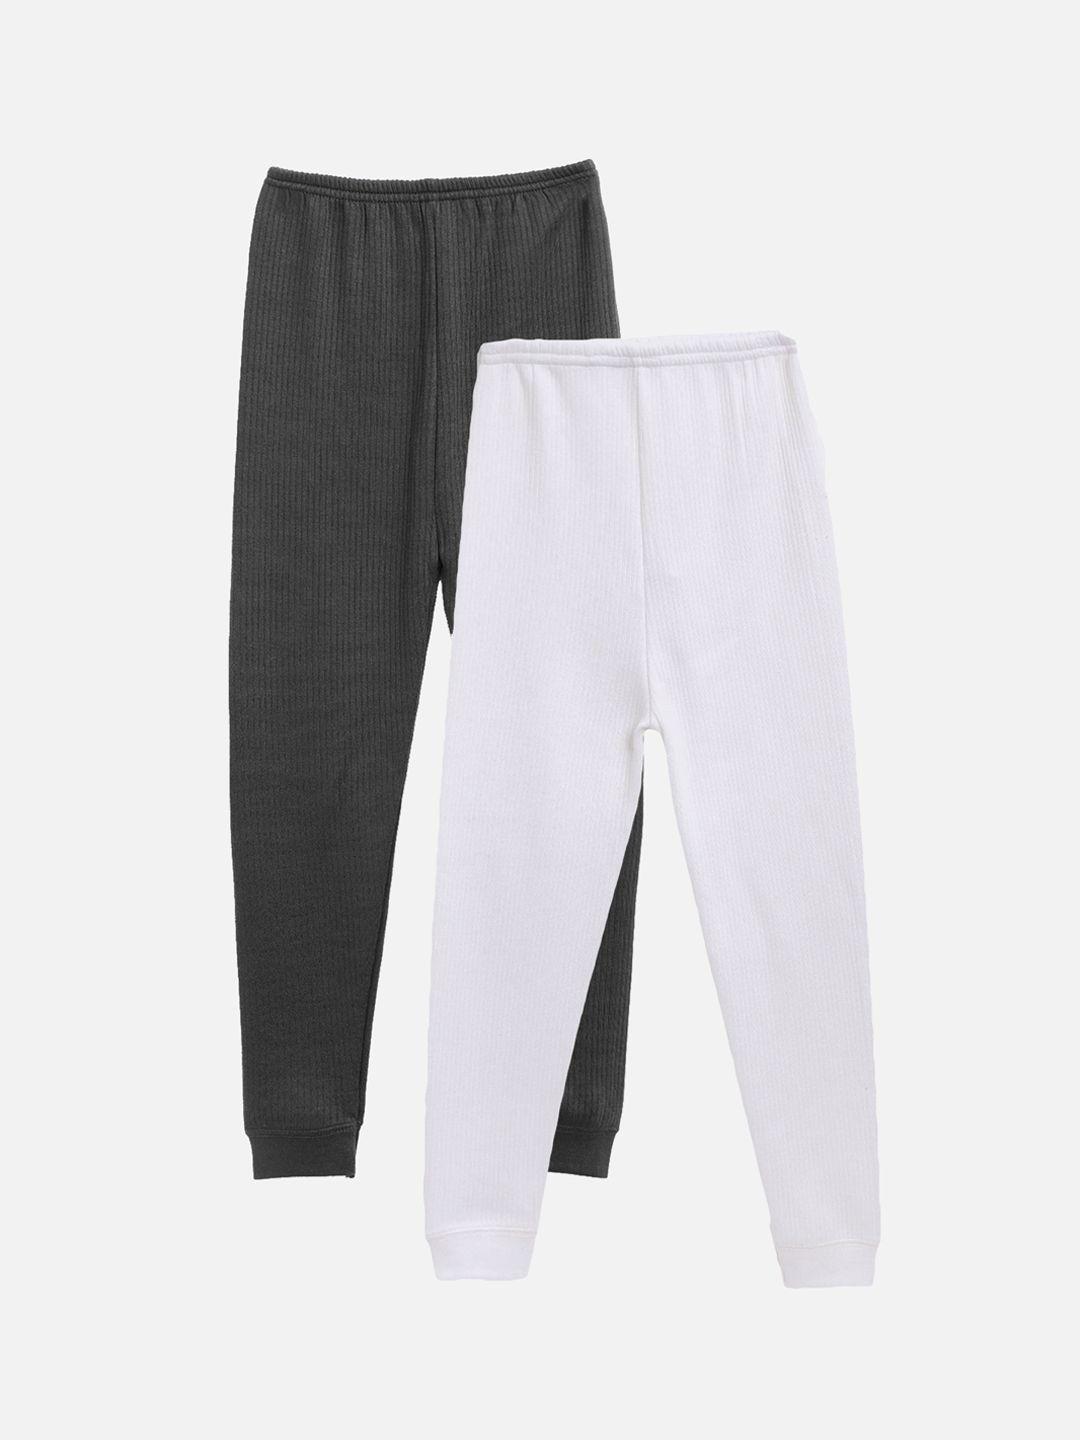 kanvin boys pack of 2 charcoal & white solid thermal bottoms